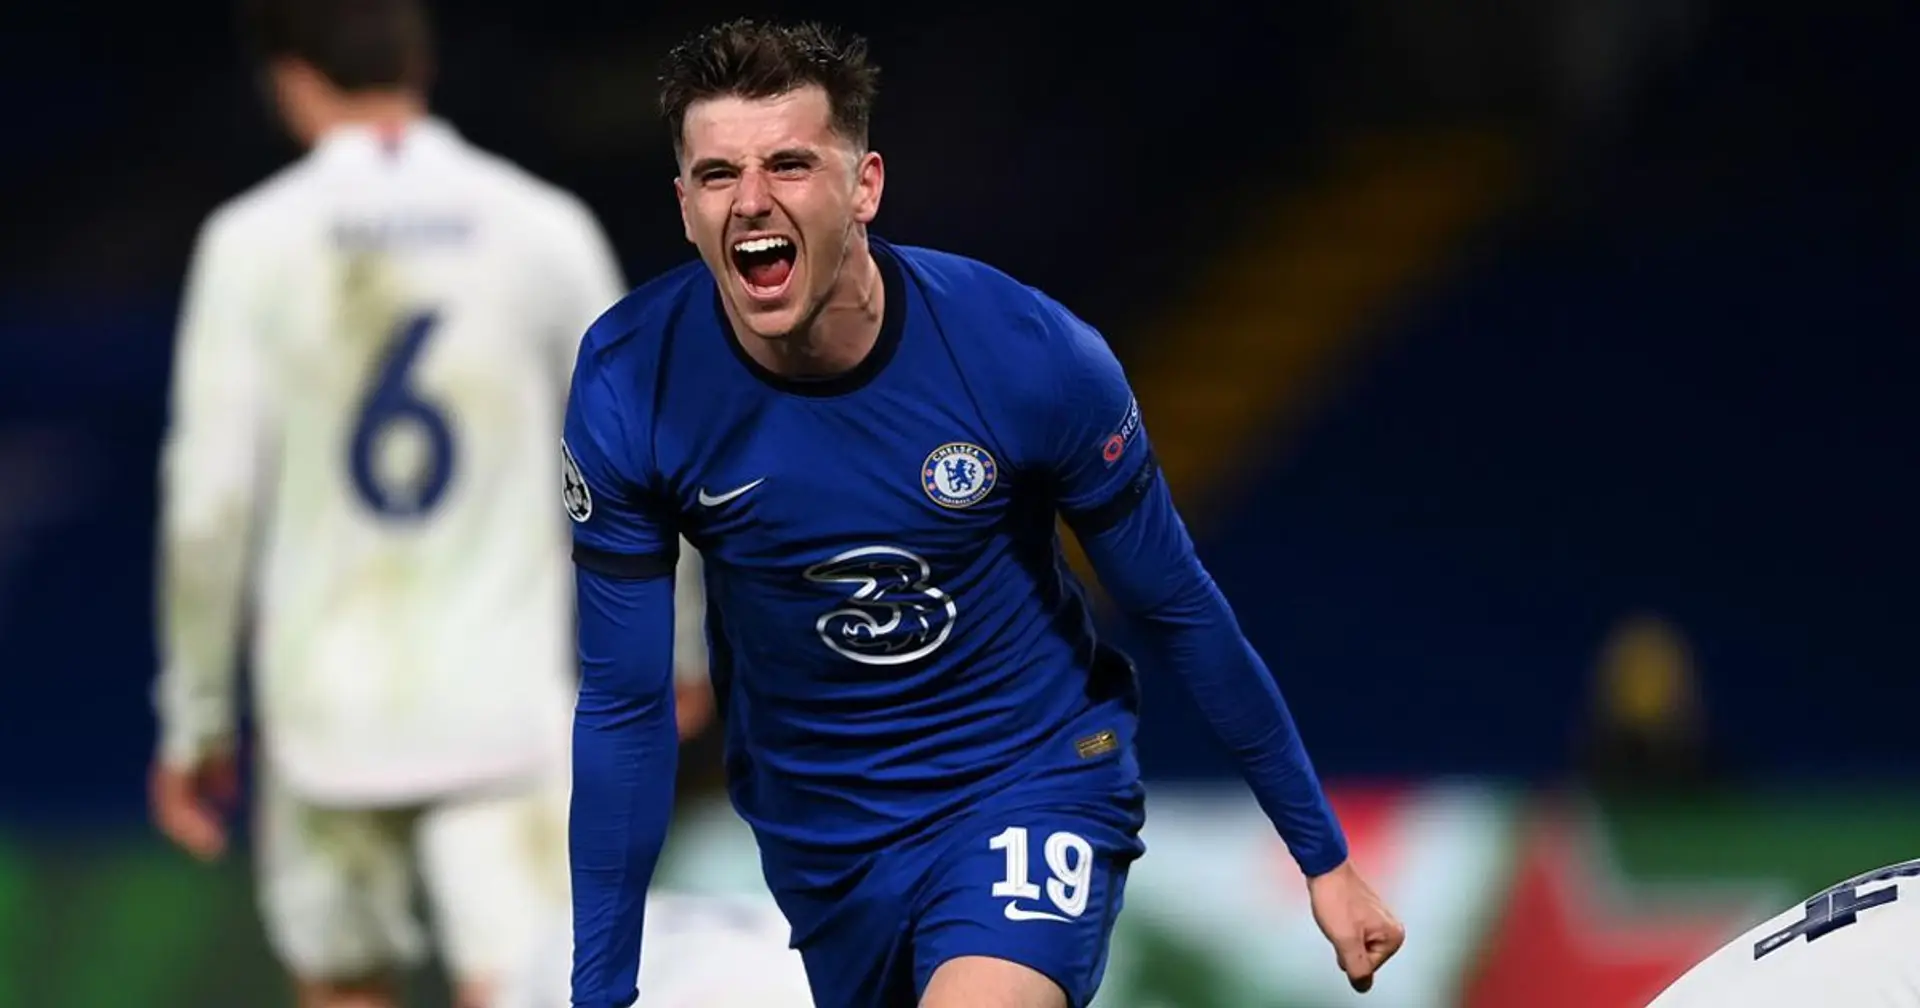 OFFICIAL: Mount voted as Chelsea fans' Player of the Year